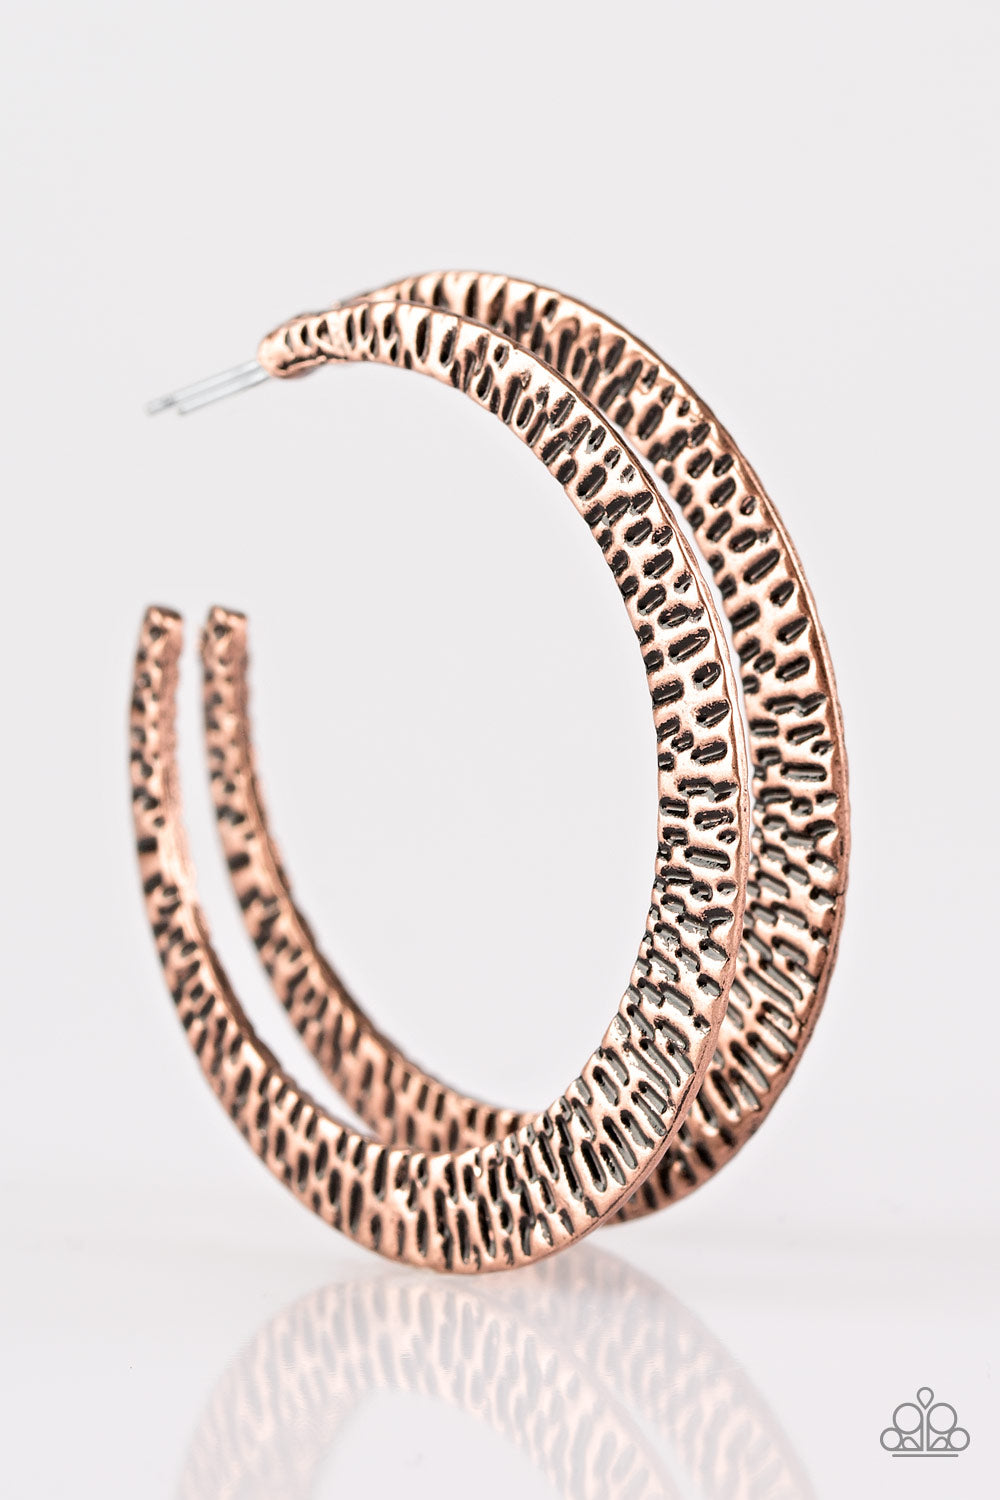 BEAST Friends Forever Copper Hoop Earring - Paparazzi Accessories